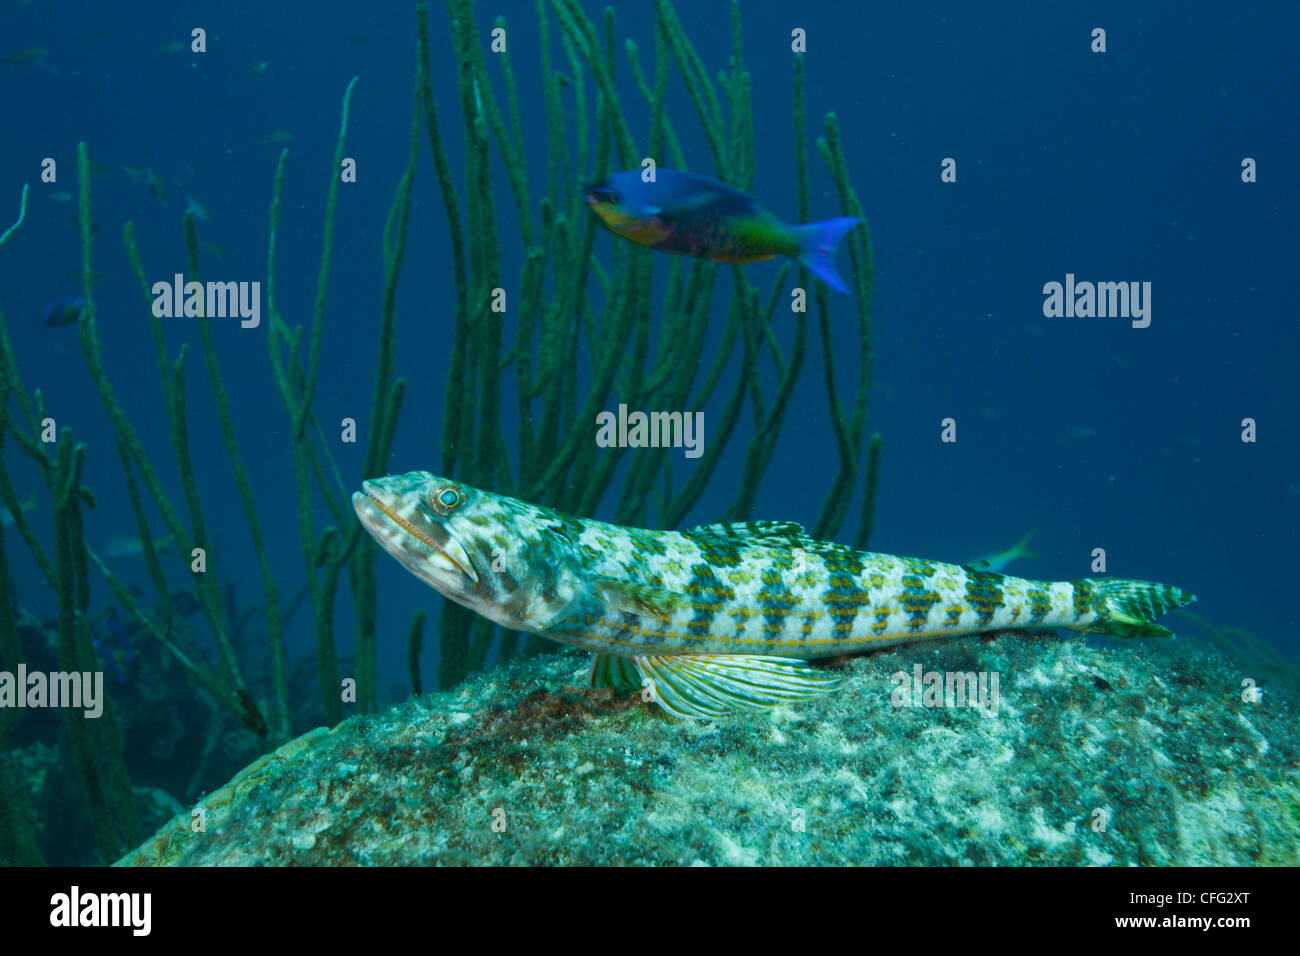 A sand diver or lizard fish, Synodus intermedius, on a dead coral. Stock Photo